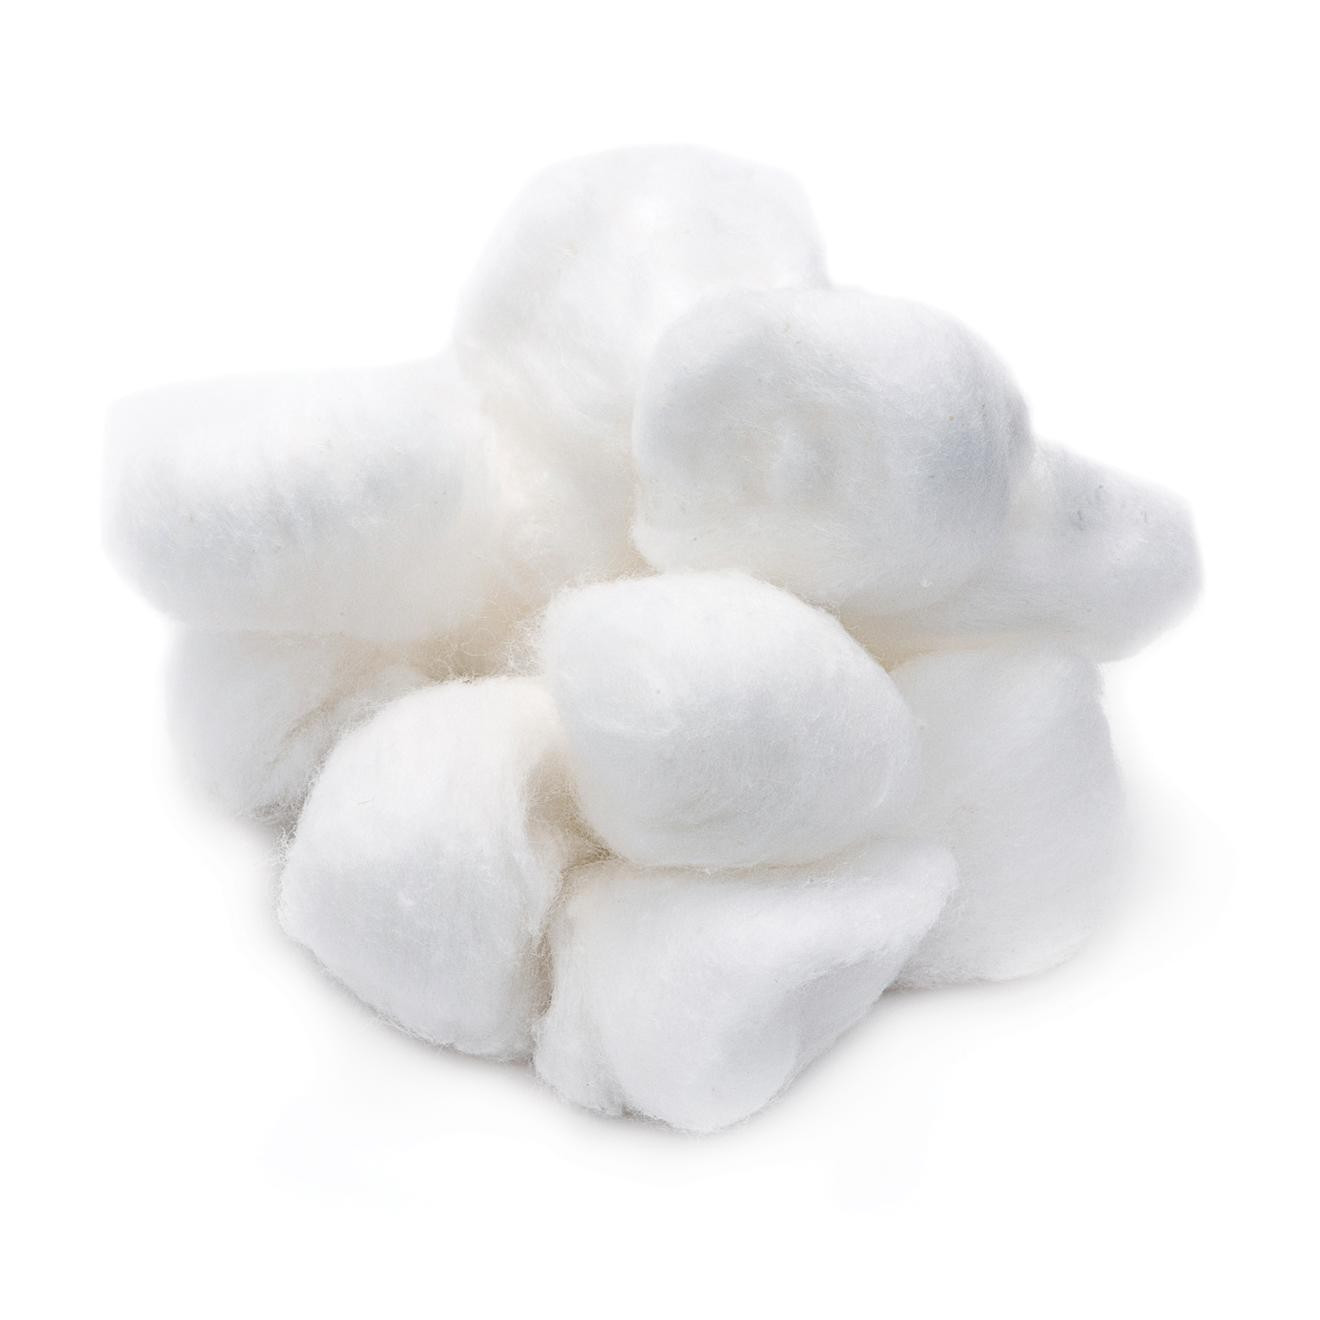 Cotton Wool - Medical Essentials - First Aid Essentials - Our Products